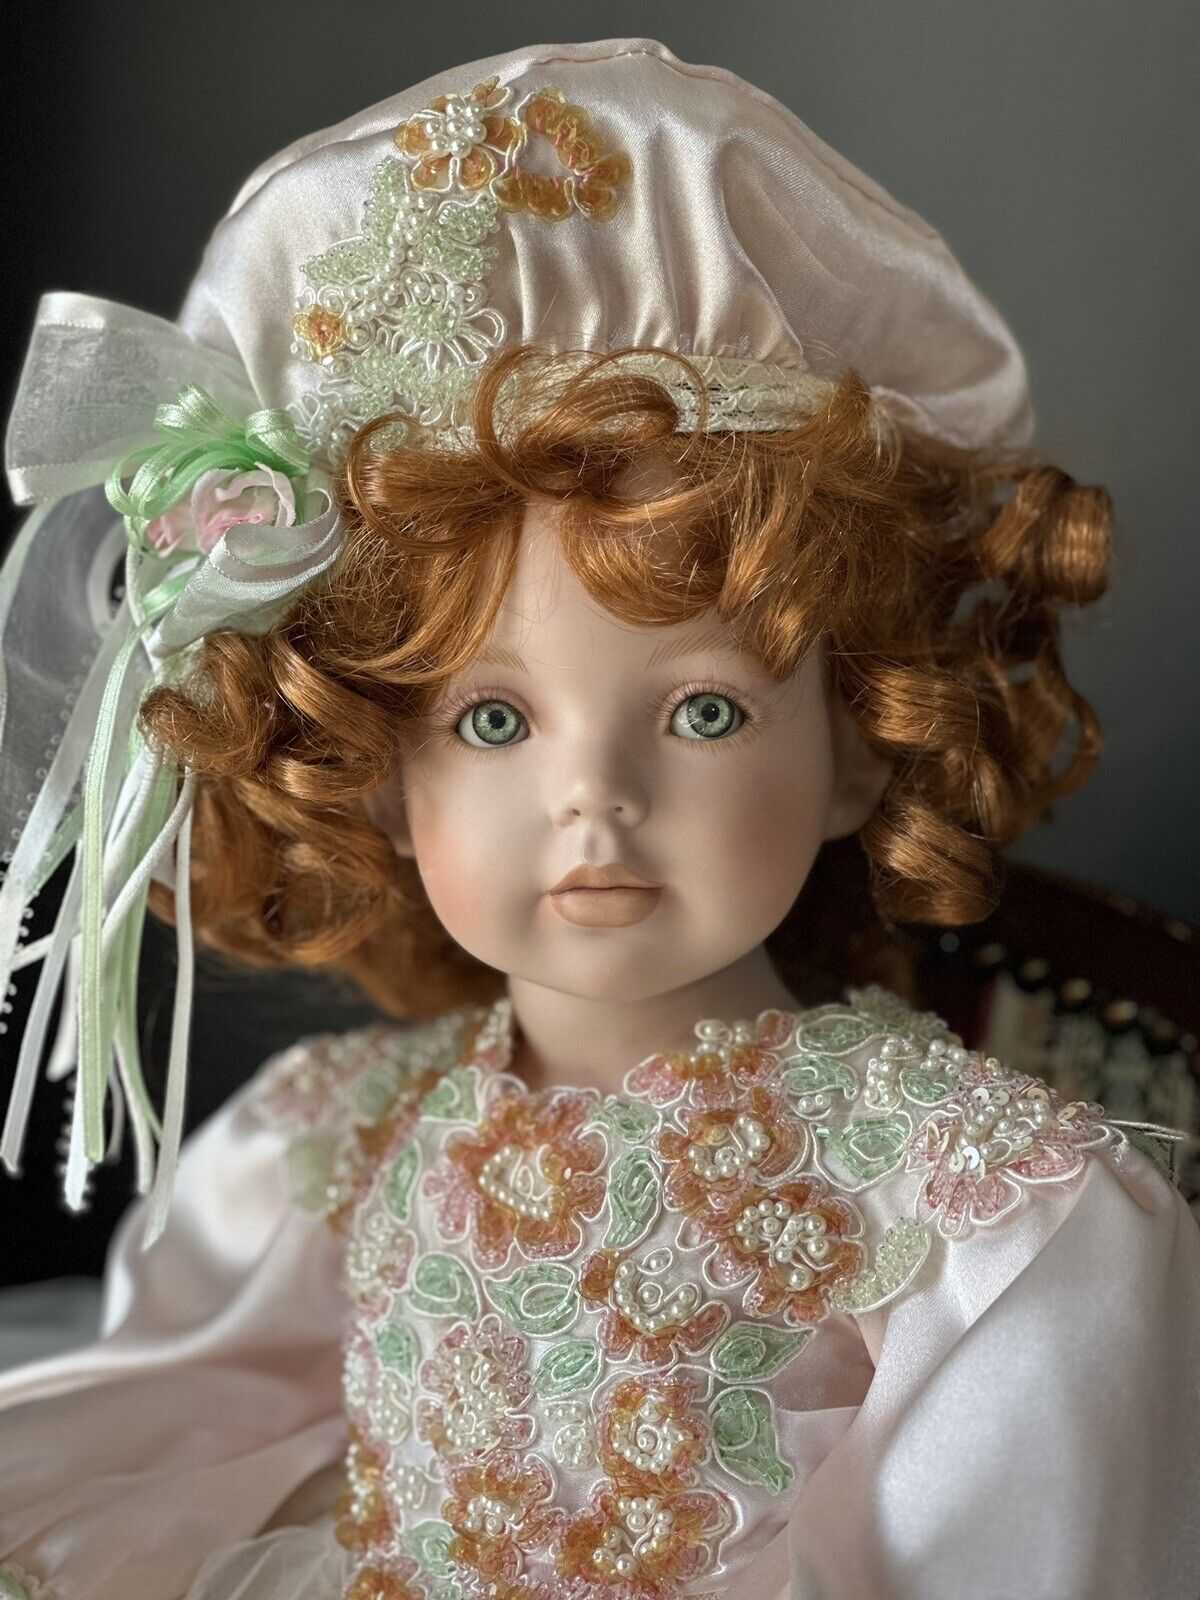 Collectible Lifelike Porcelain 24” Doll by Donna RuBert and Rustie LE 1000